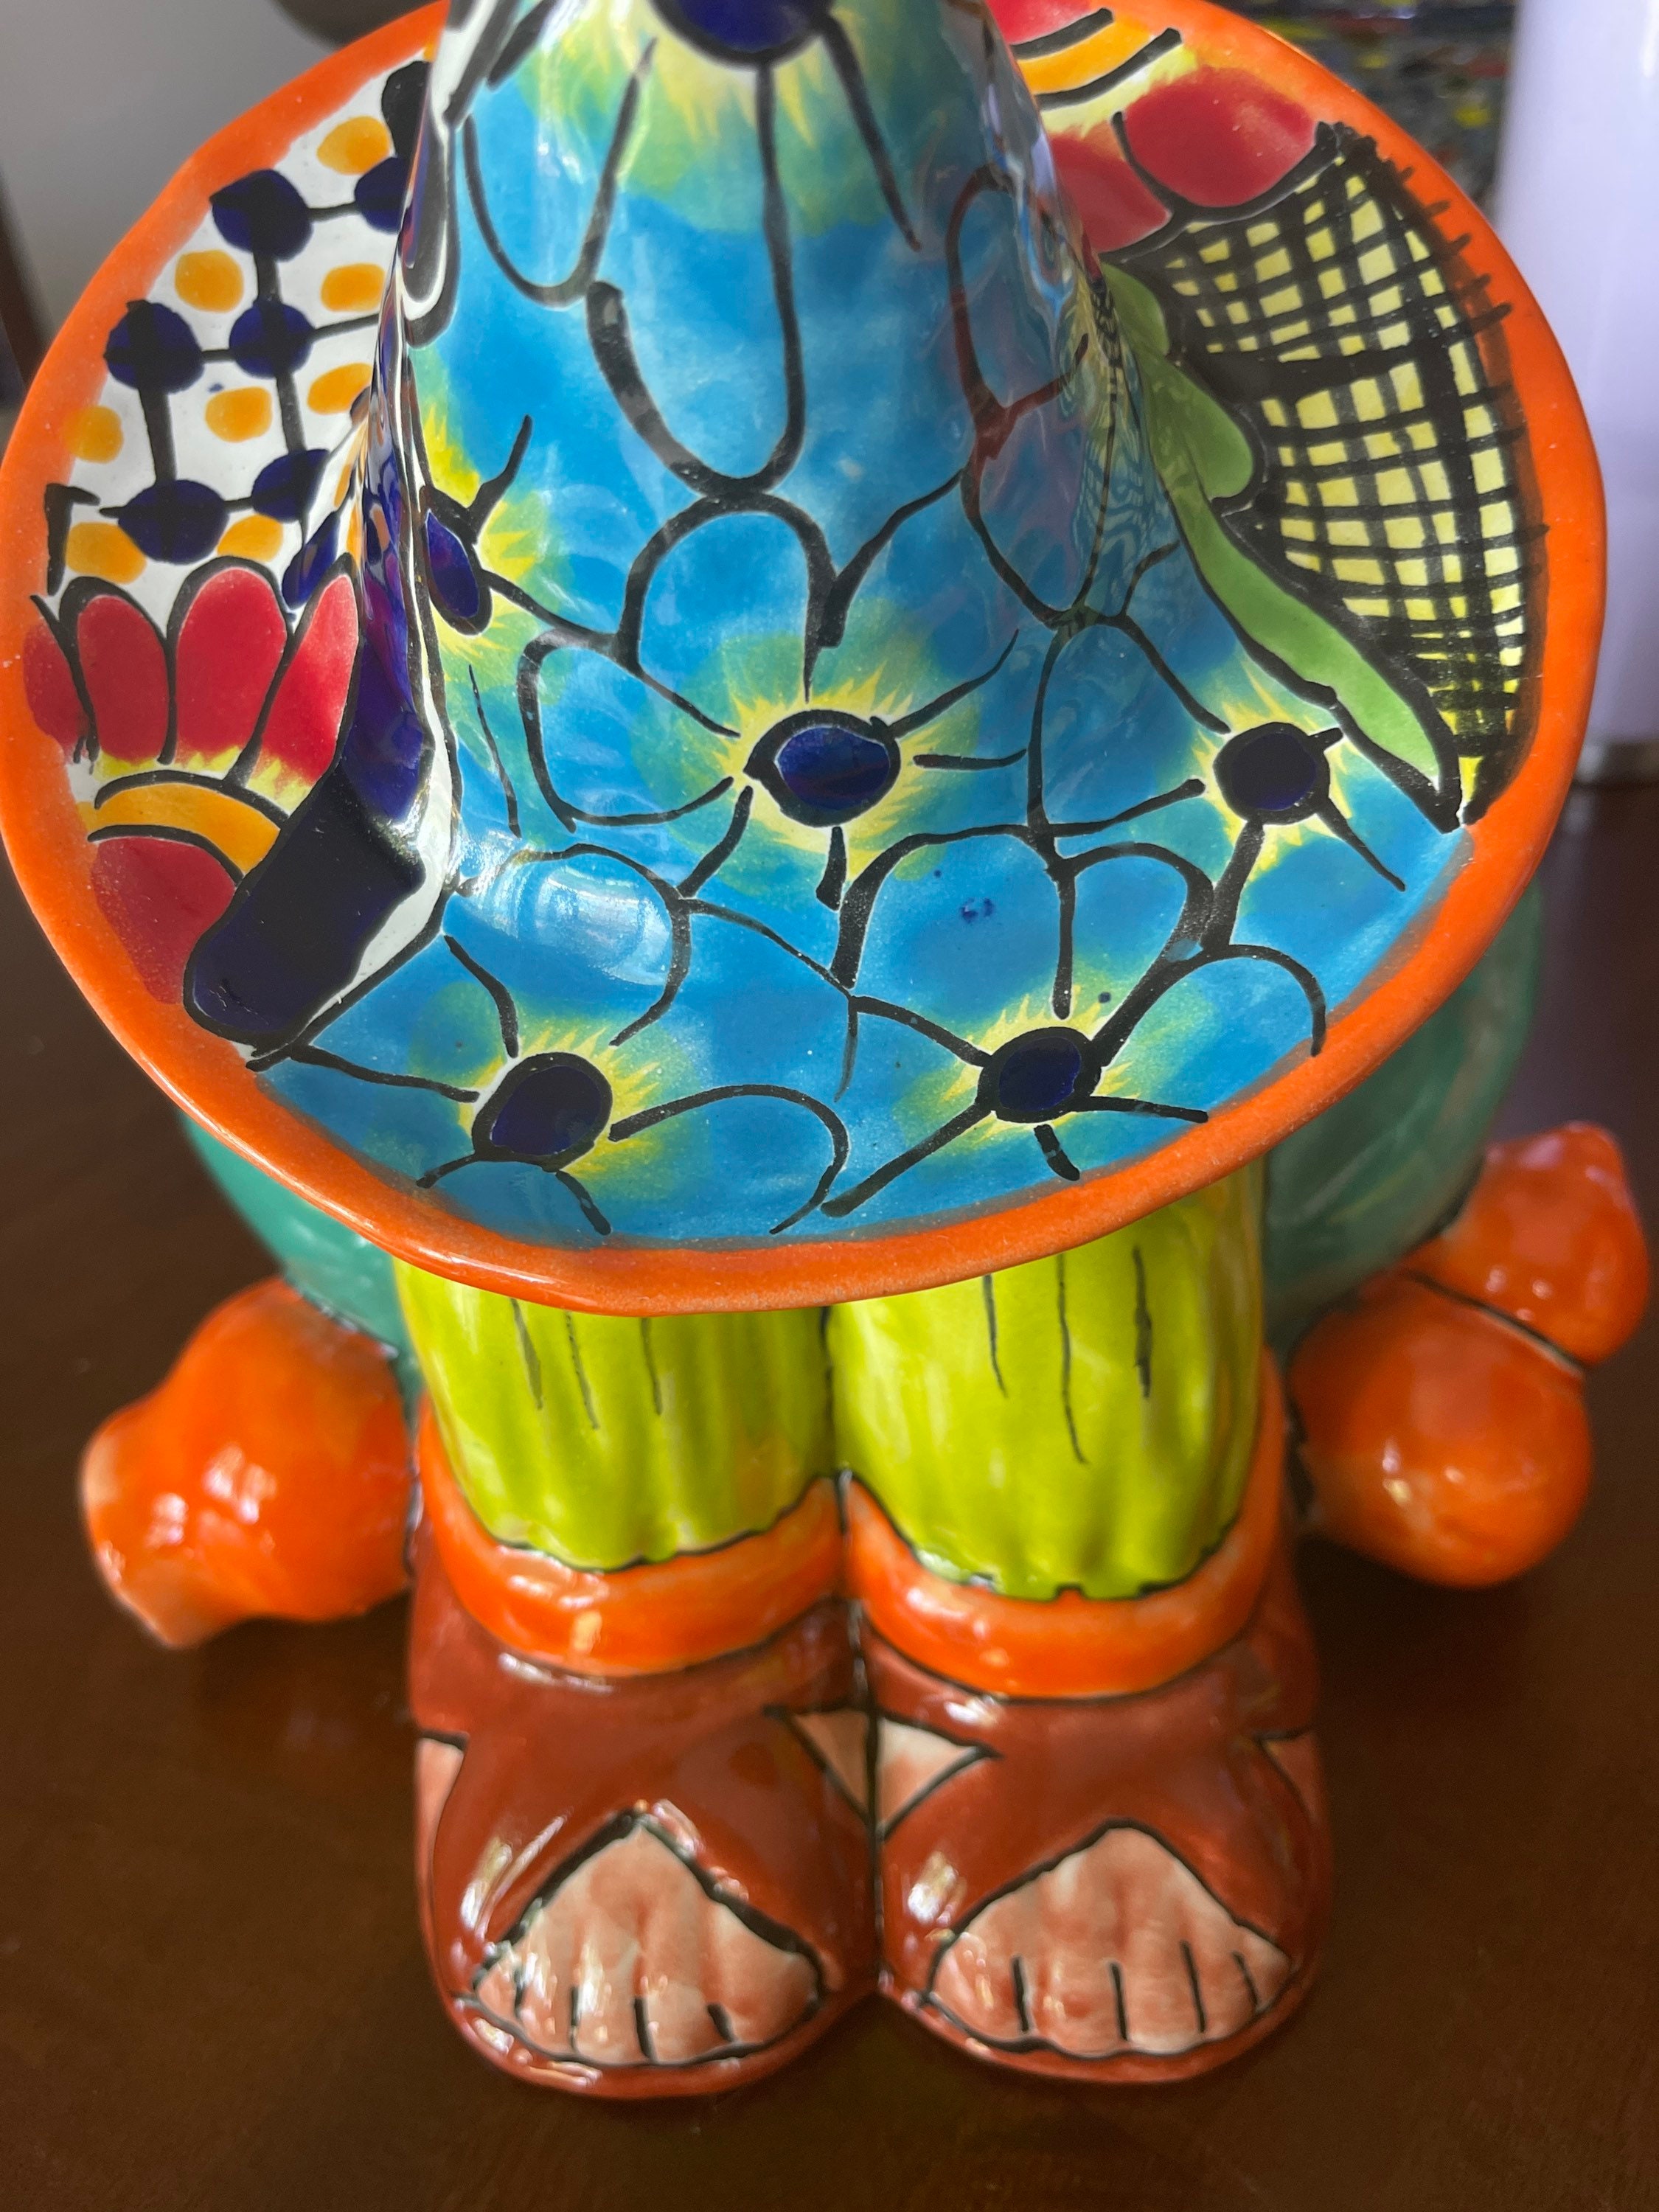 Canister Ponchito Mexican Talavera Cookie Jar Panchito the Hat Come off the  Canister, Great for Storing Cookies, Candies 